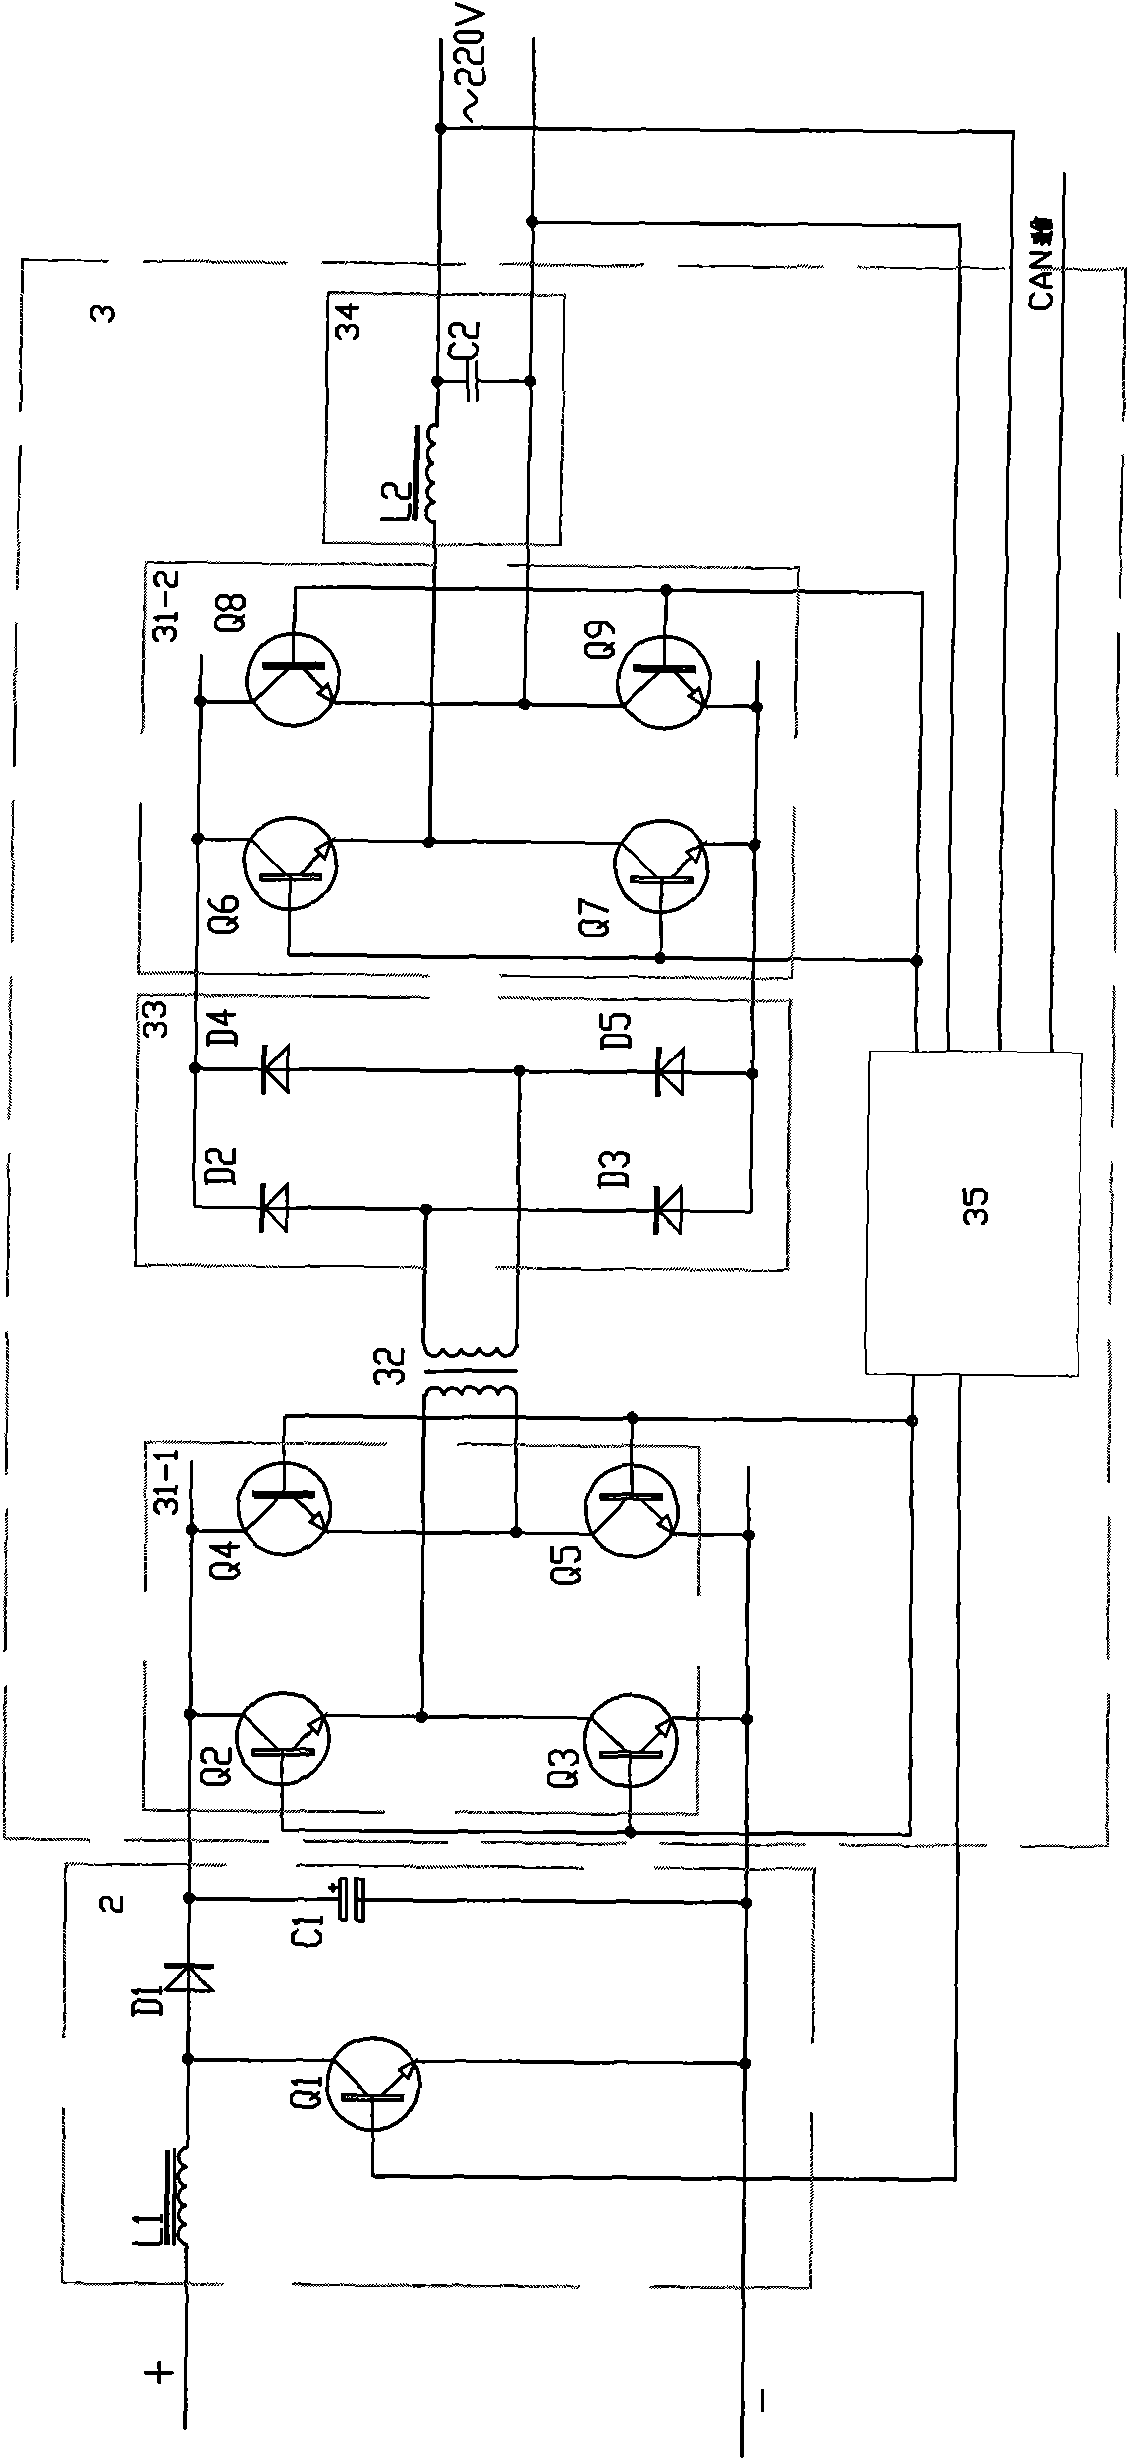 Power monitoring and energy saving system